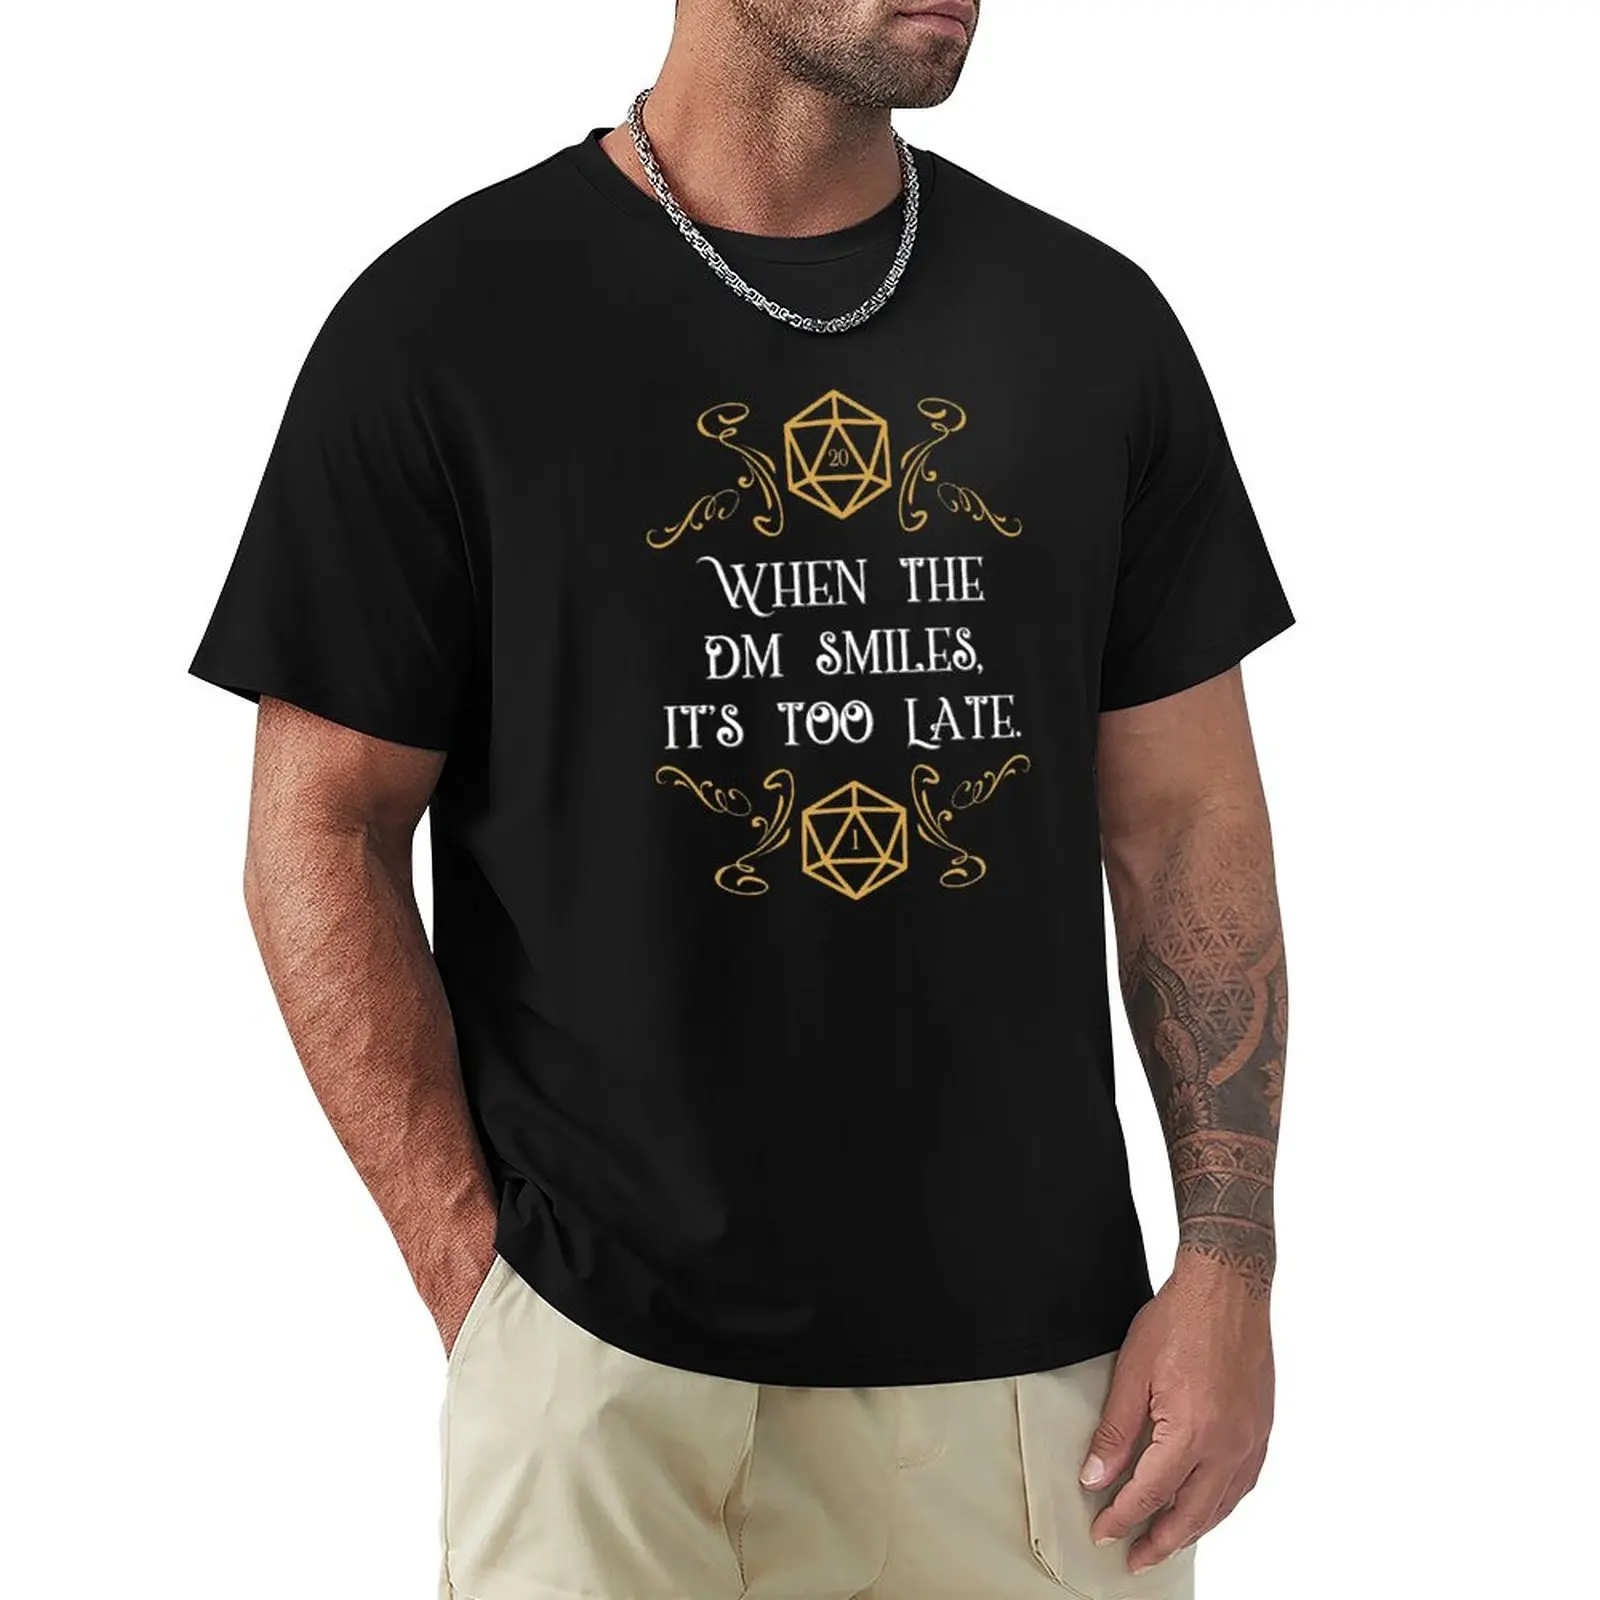 

When The Master Smiles It's Too Late 20 Sided Dice T-Shirt Funny T Shirt Plus Size Tops T-shirts For Men Cotton